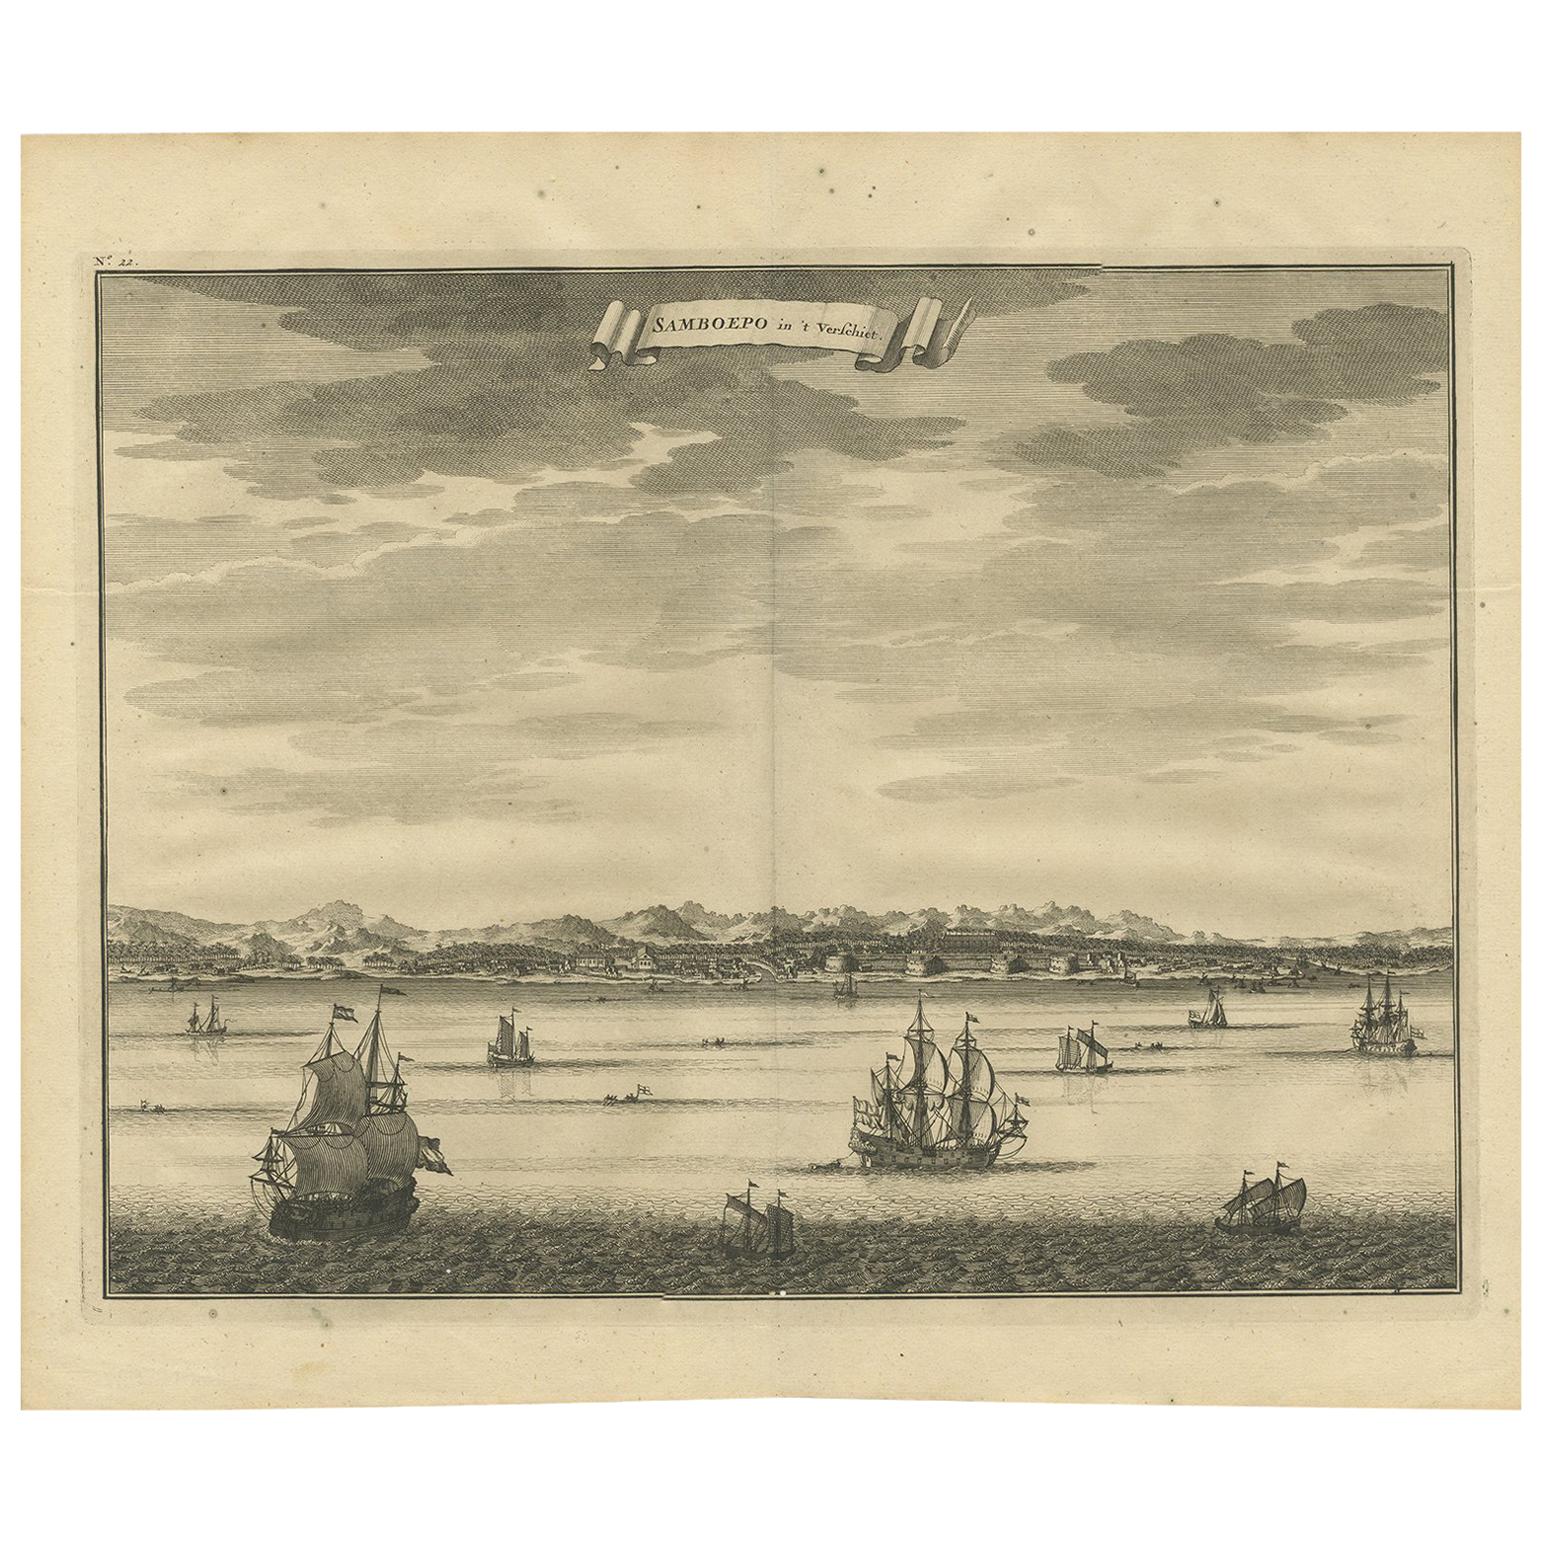 Antique Print of Samboepo by Valentijn, 1726 For Sale